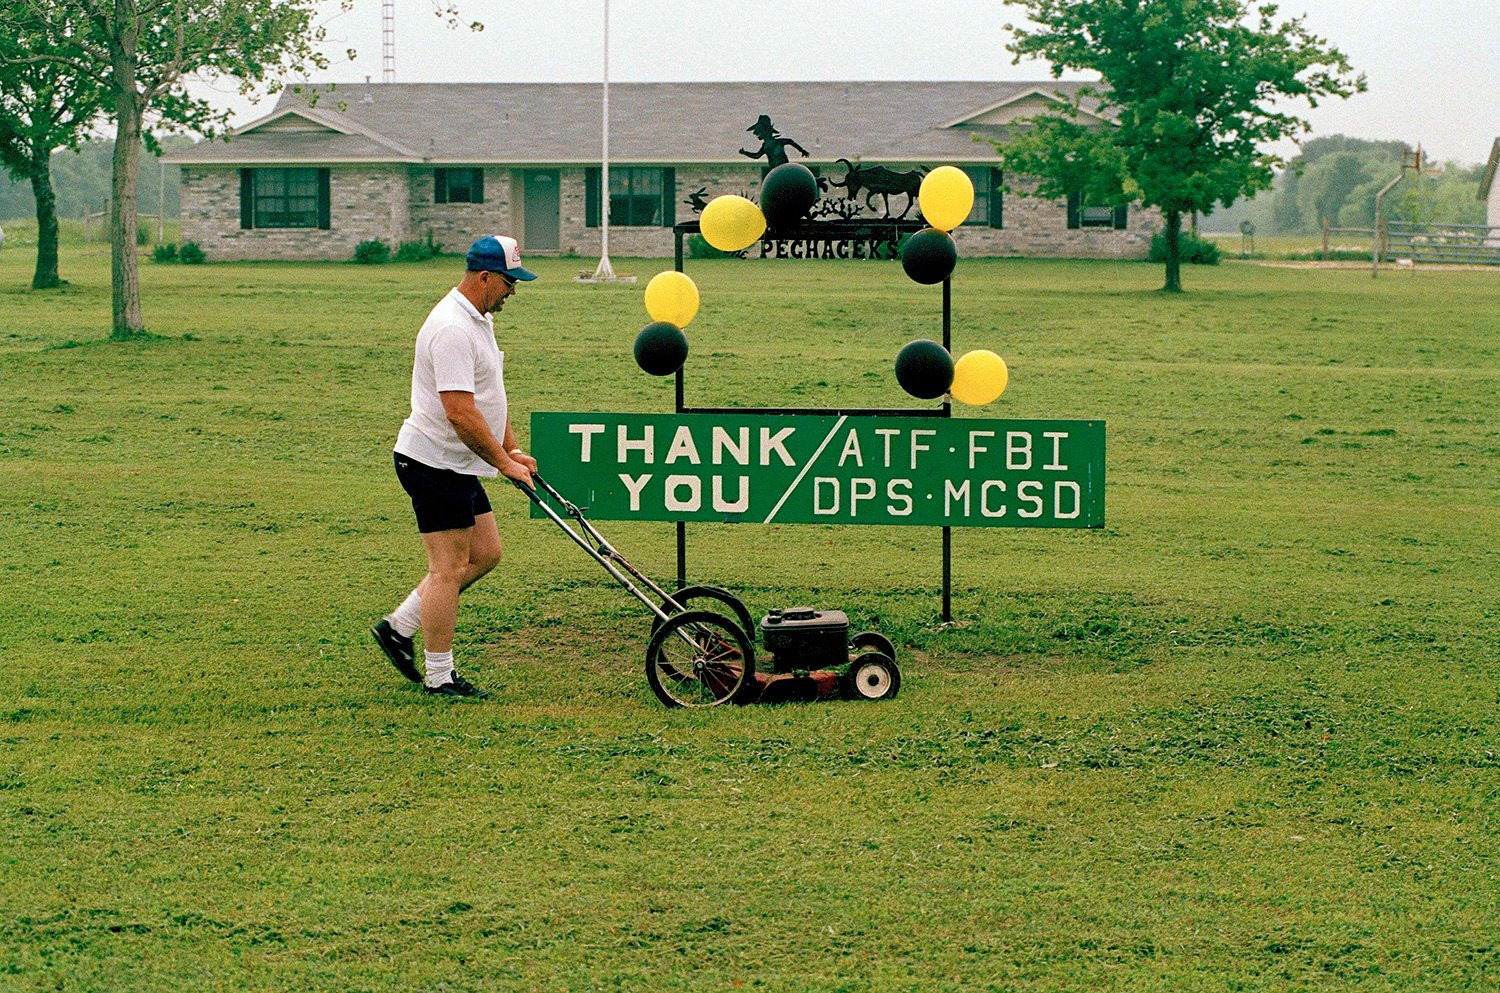  Dan Pehaeck displays a thank you sign to law enforcement agents at his home in Waco, Texas, May 8, 1993. ATF agents involved in the February 28 raid on the Branch Davidian compound returned to the scene to help cope with the death of their four co-w